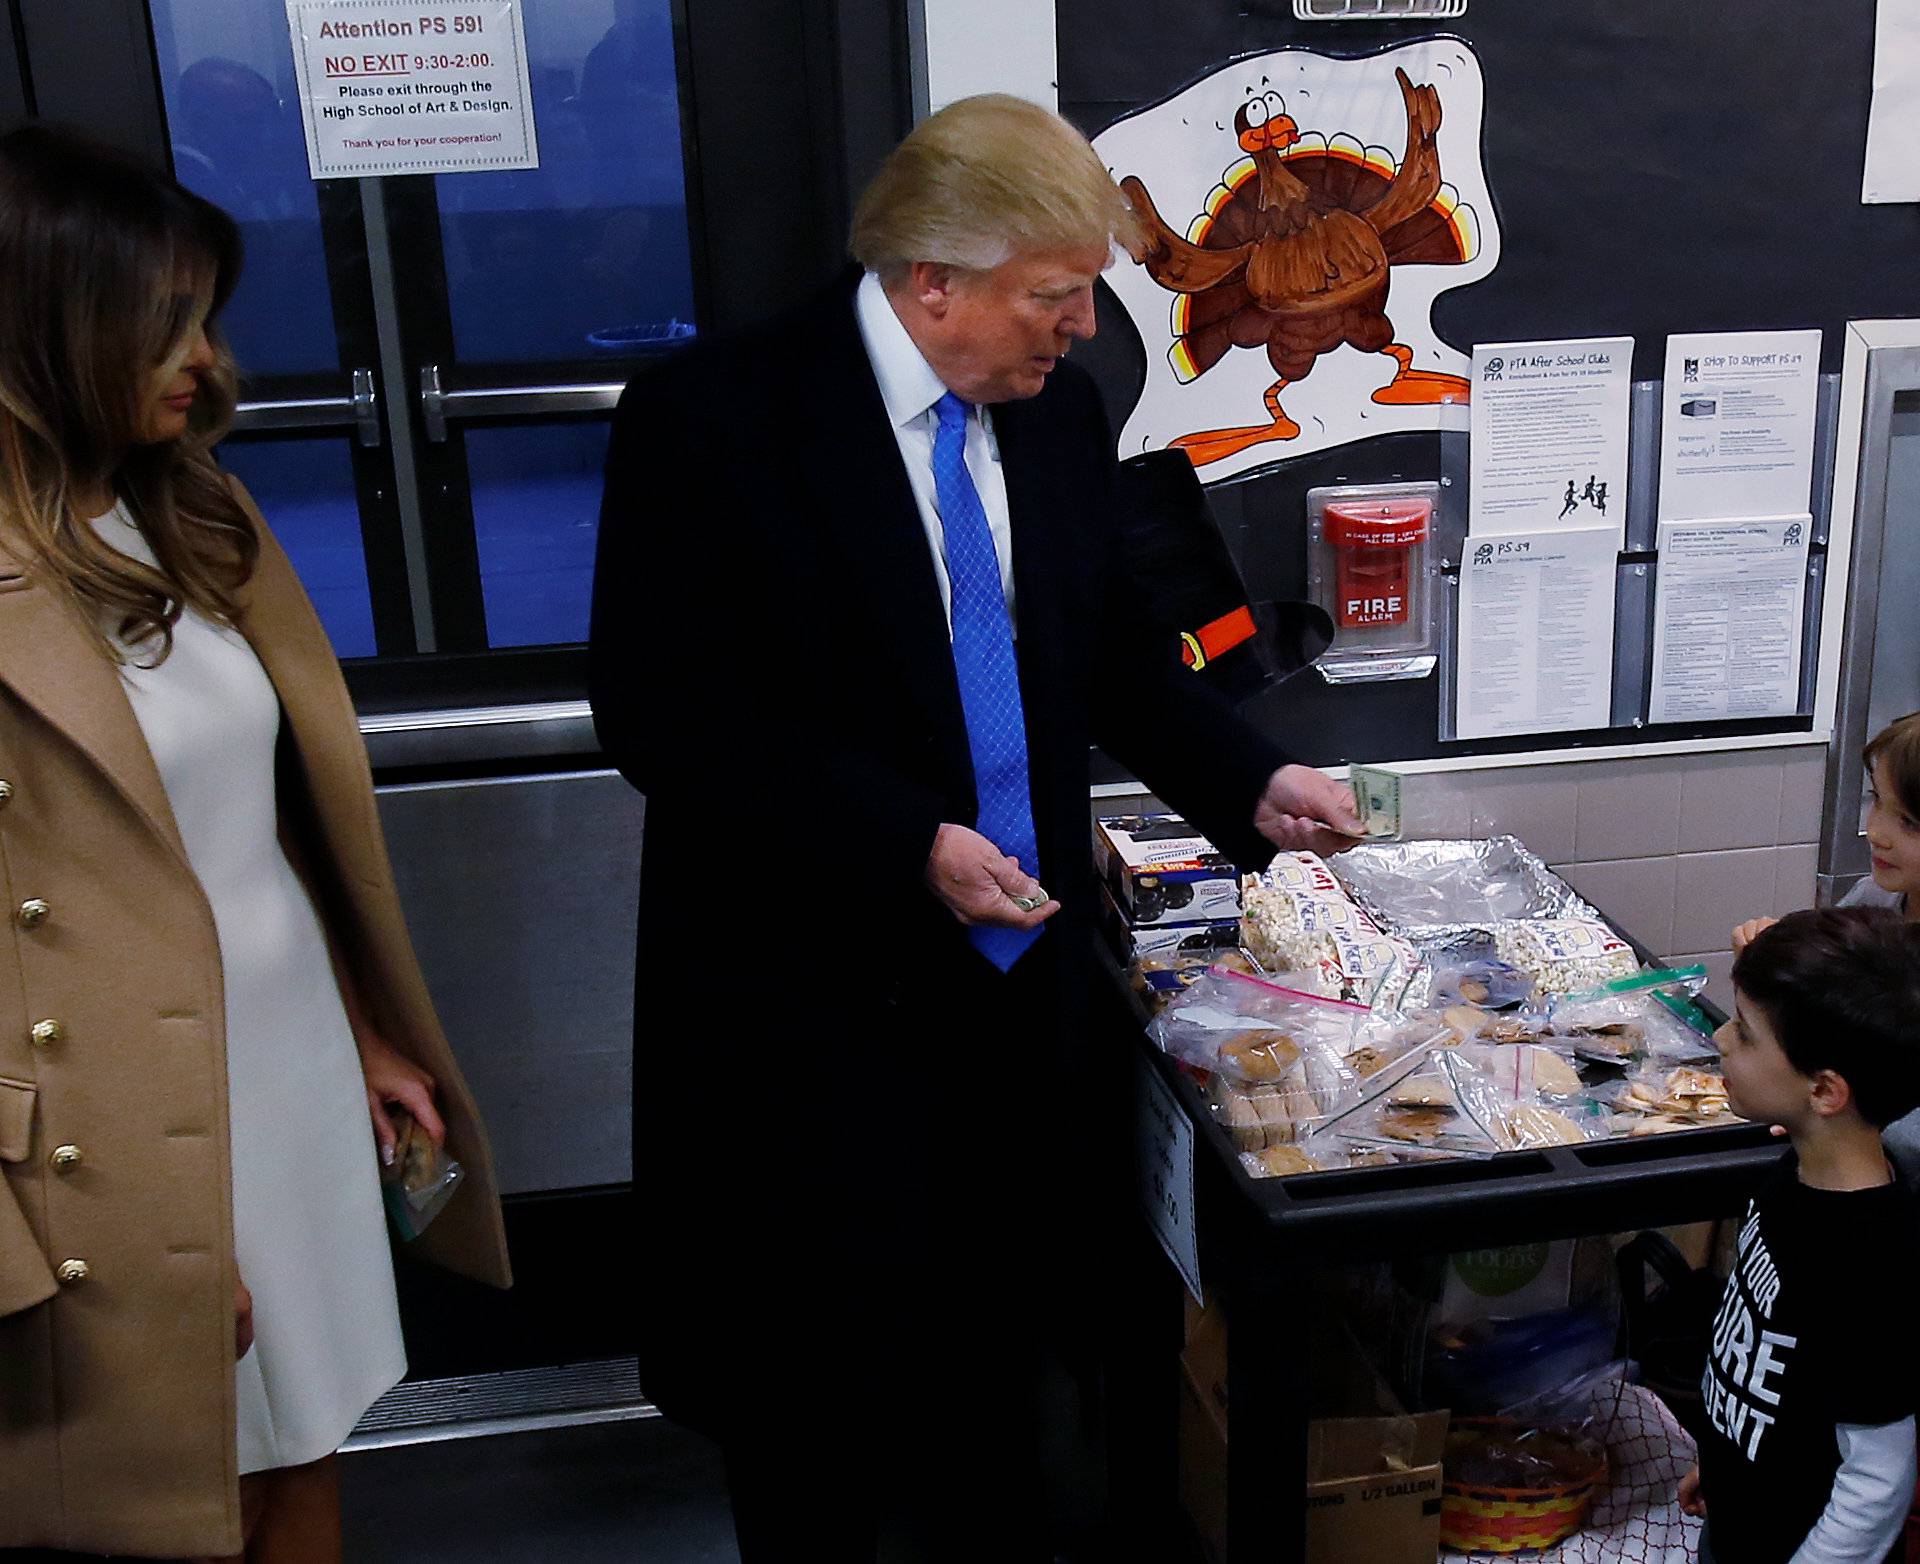 Republican presidential nominee Donald Trump hands money to a child at a bake sale table before voting at PS 59 in New York